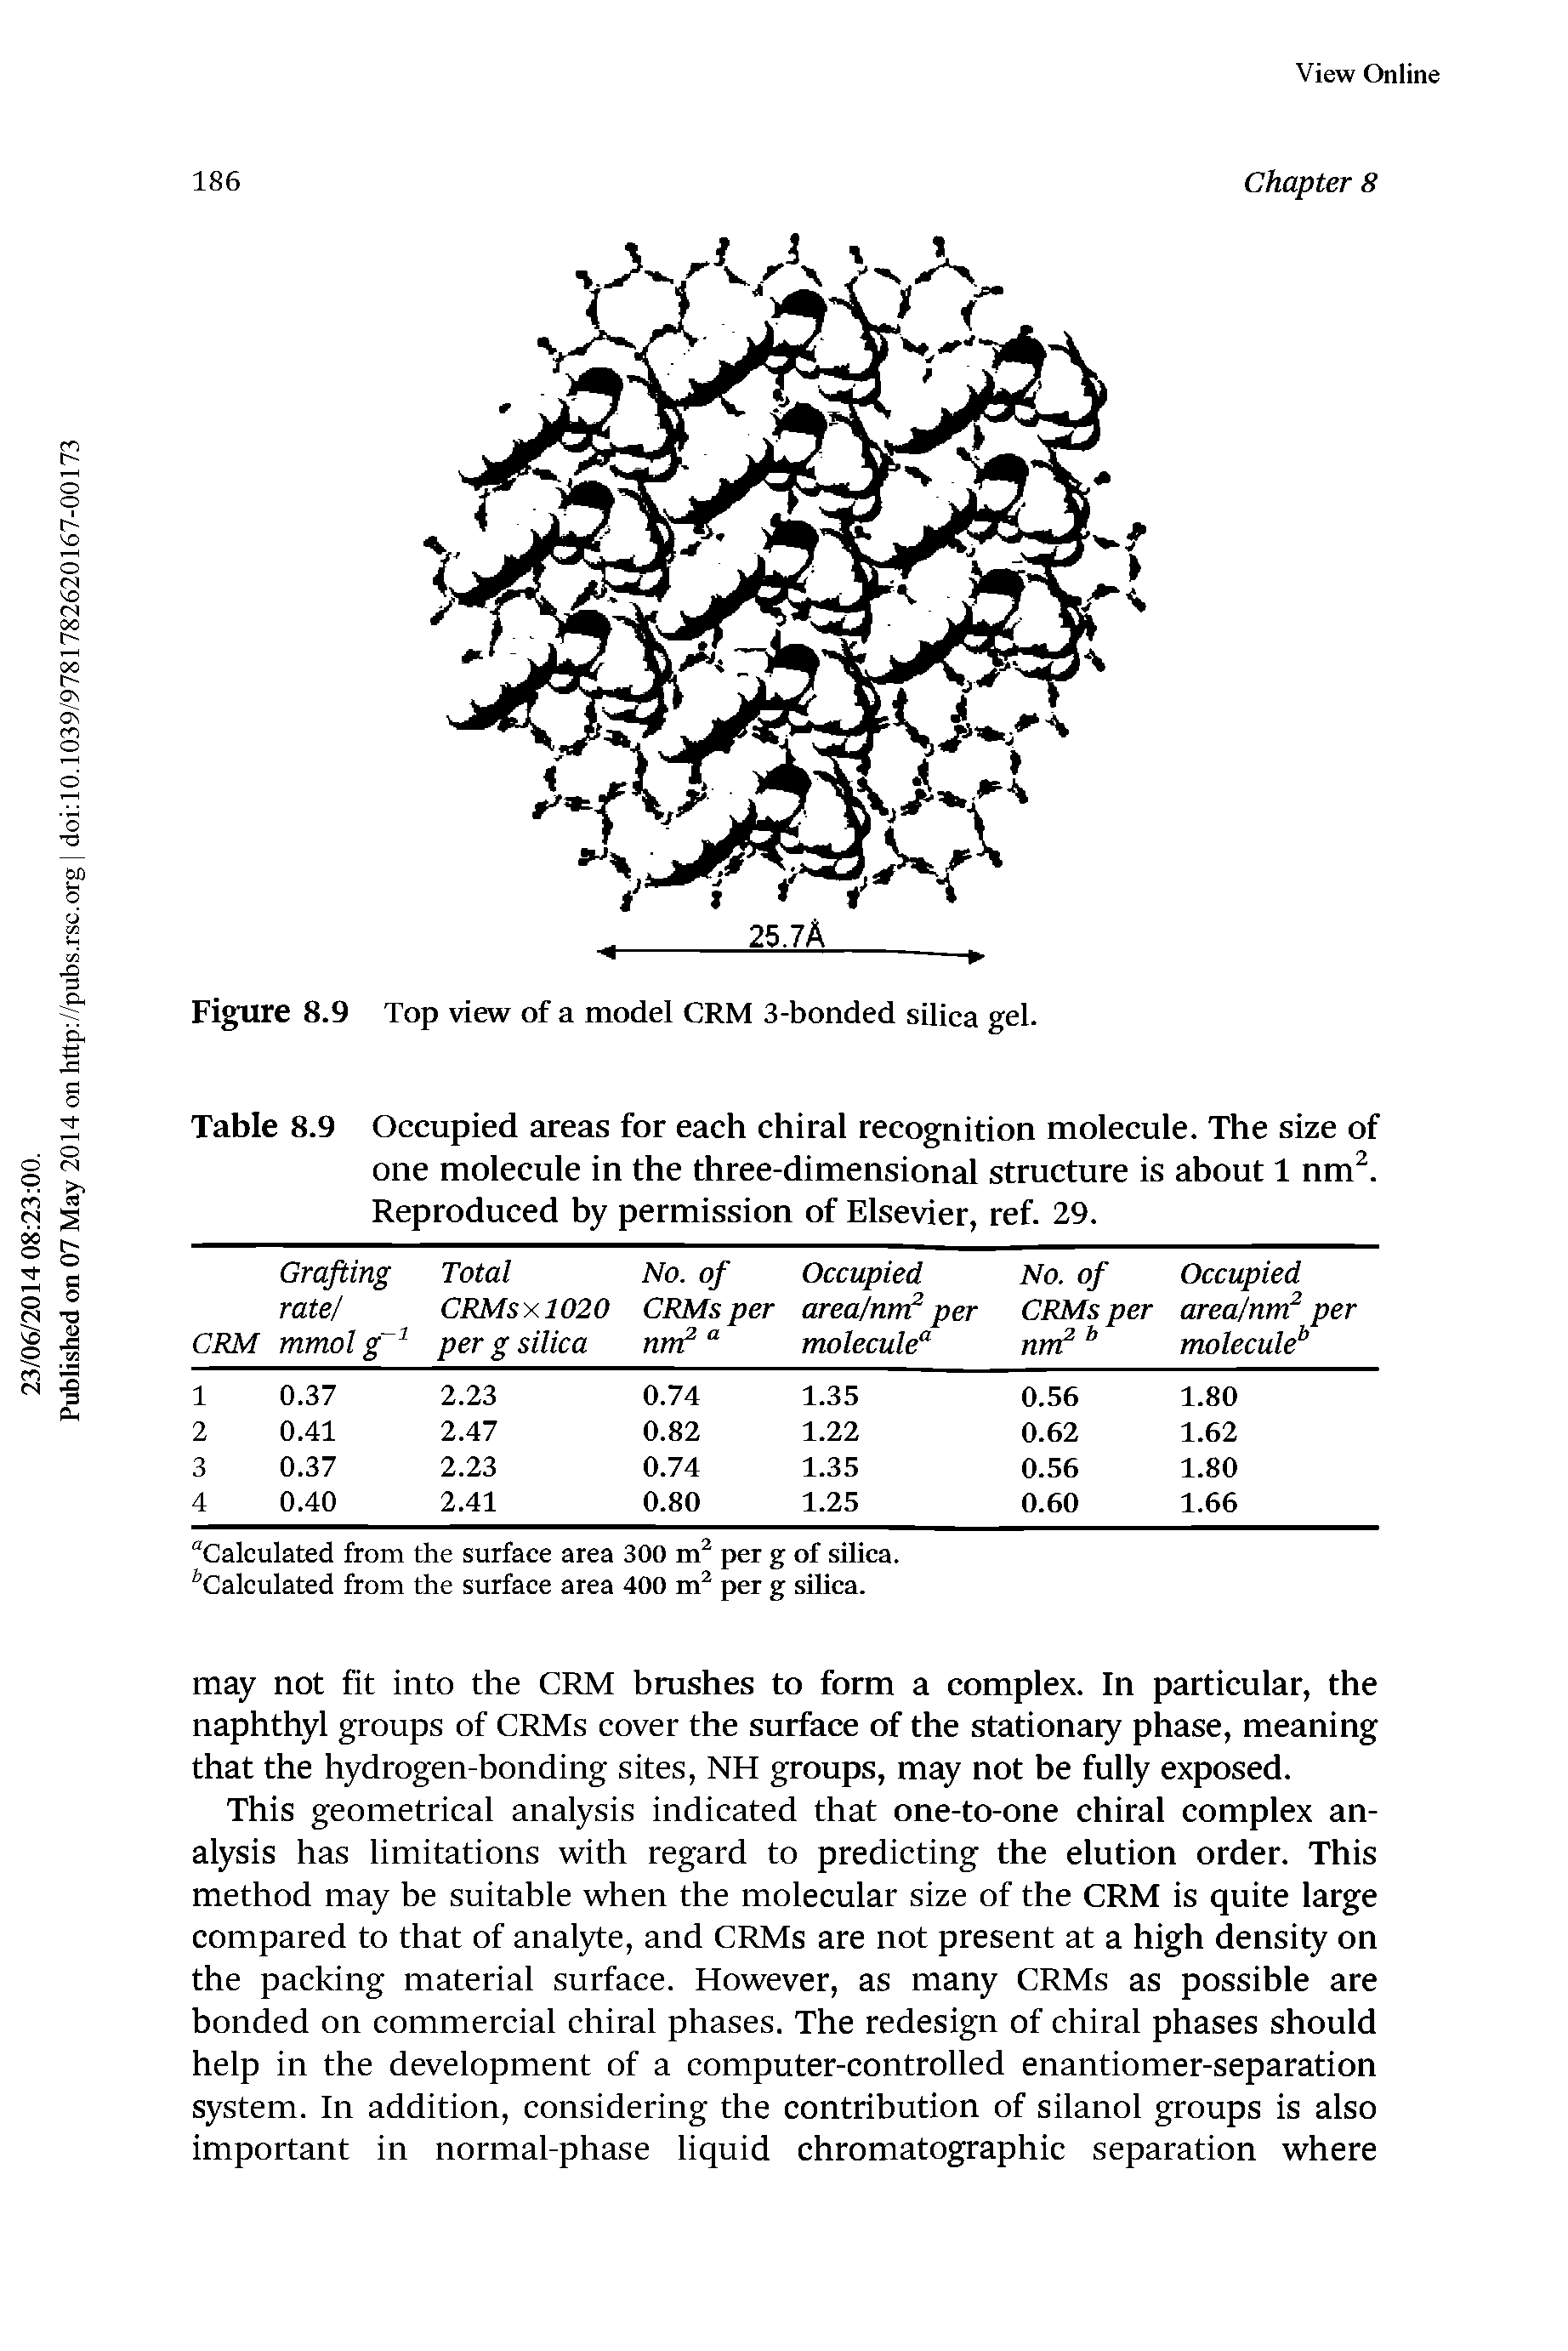 Table 8.9 Occupied areas for each chiral recognition molecule. The size of one molecule in the three-dimensional structure is about 1 nm. Reproduced by permission of Elsevier, ref. 29.